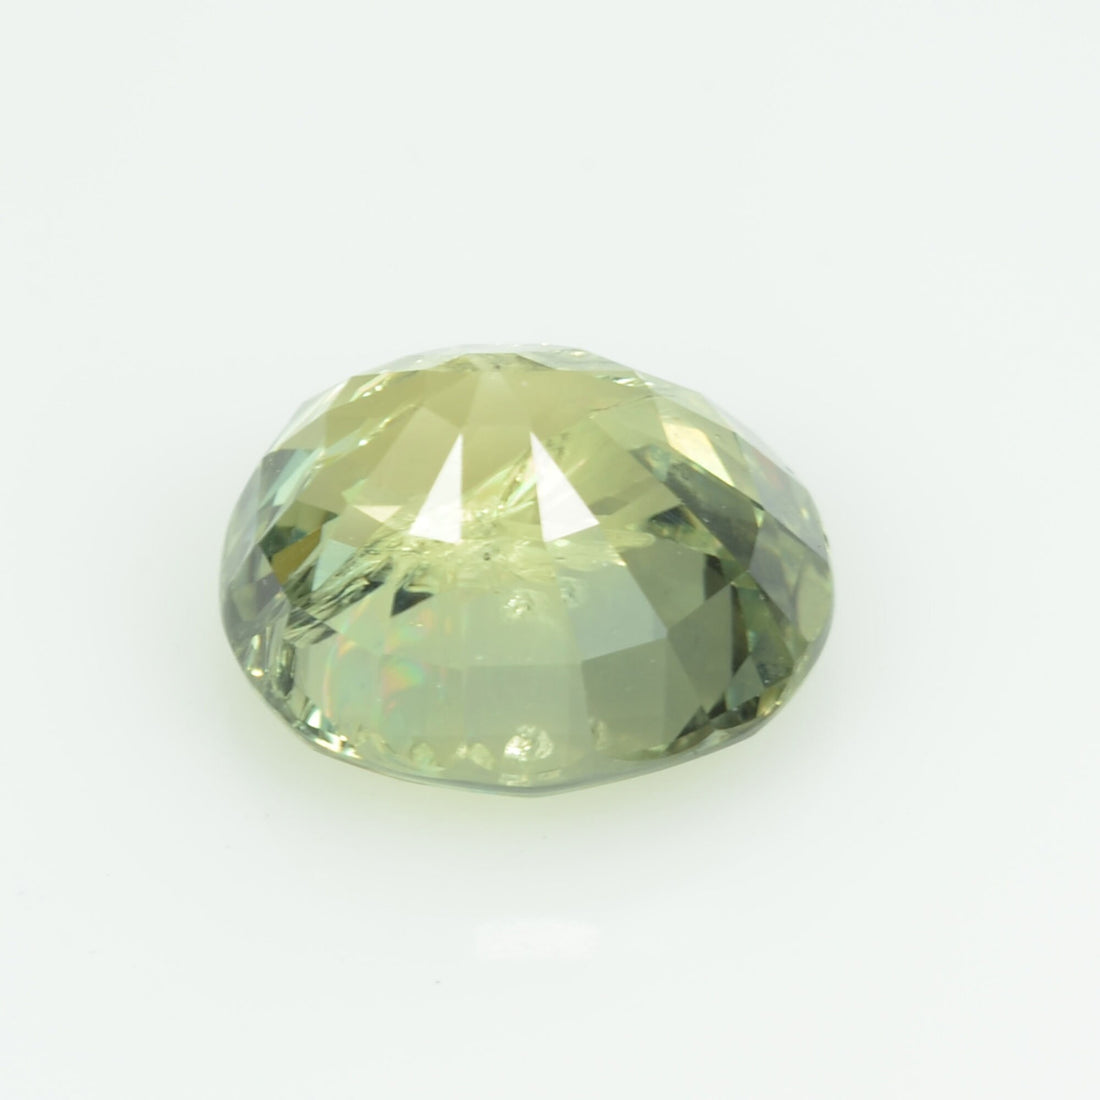 5.78 Cts Natural Green Sapphire Loose Gemstone Oval Cut